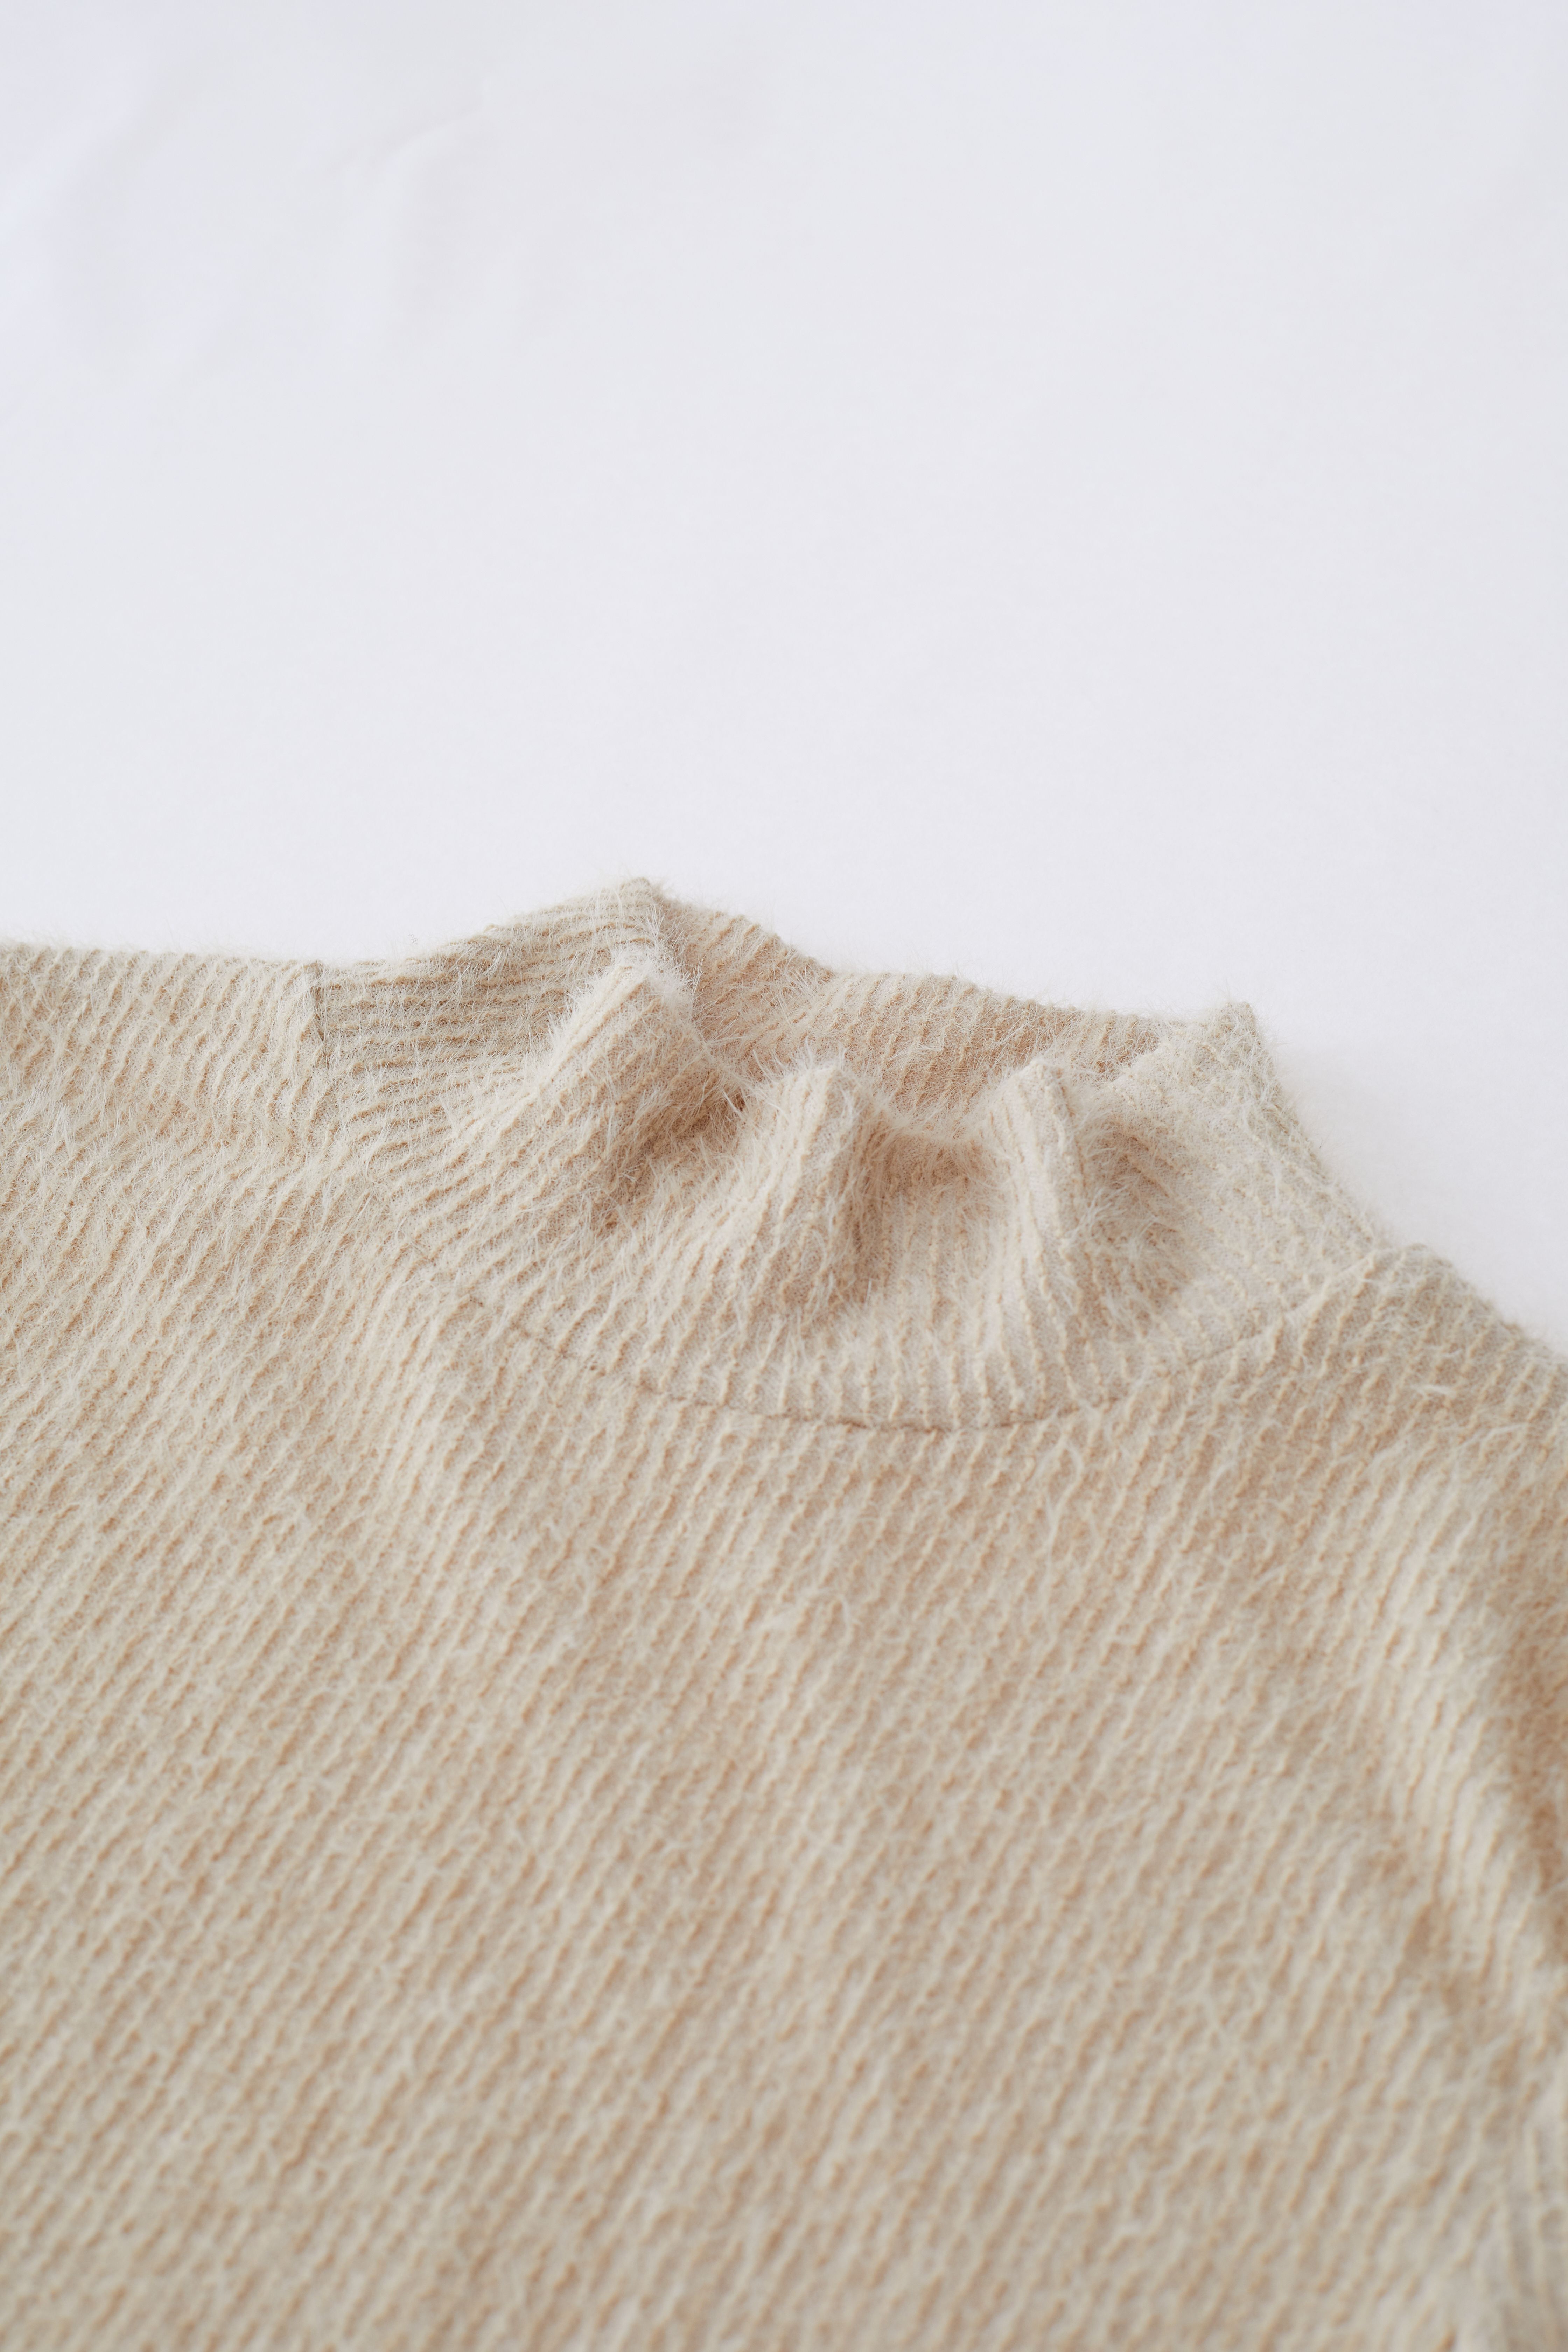 Fuzzy Mock Neck Knit Top in Light Tan - Retro, Indie and Unique Fashion